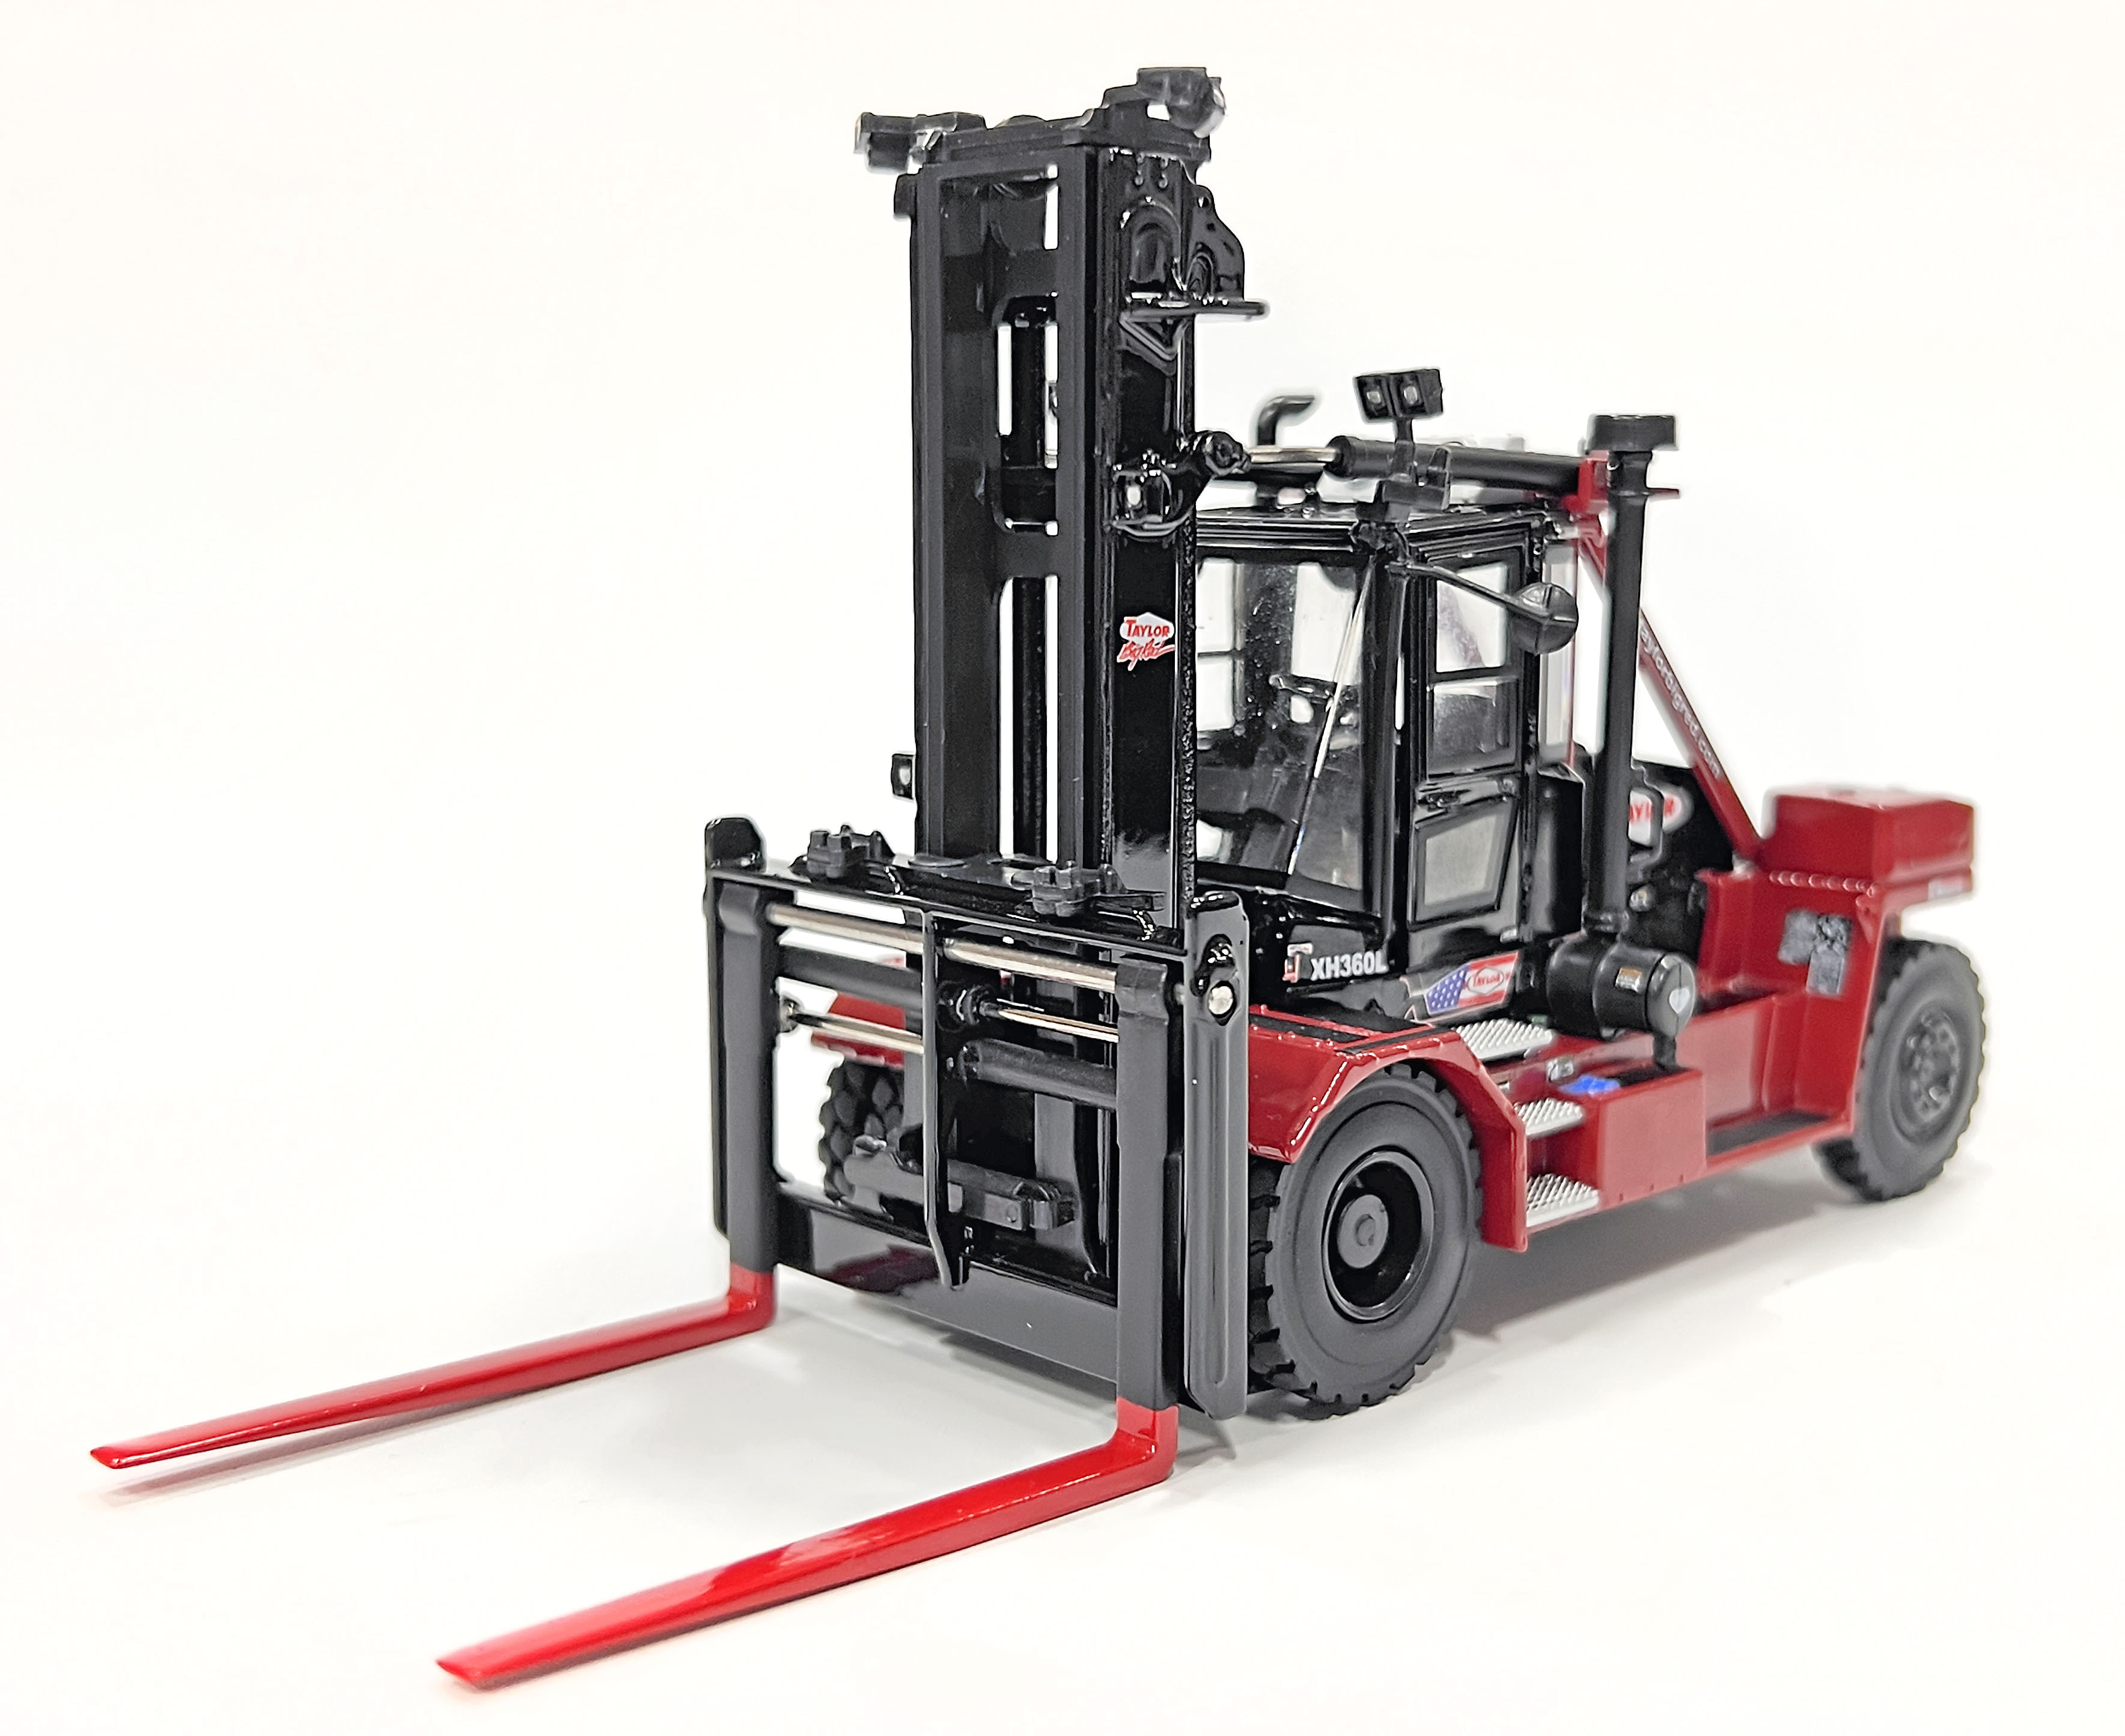 Product Image - Weiss Brothers WBR033-300 - Large Taylor Forklift XH-360L Diecast - 1:50 Scale